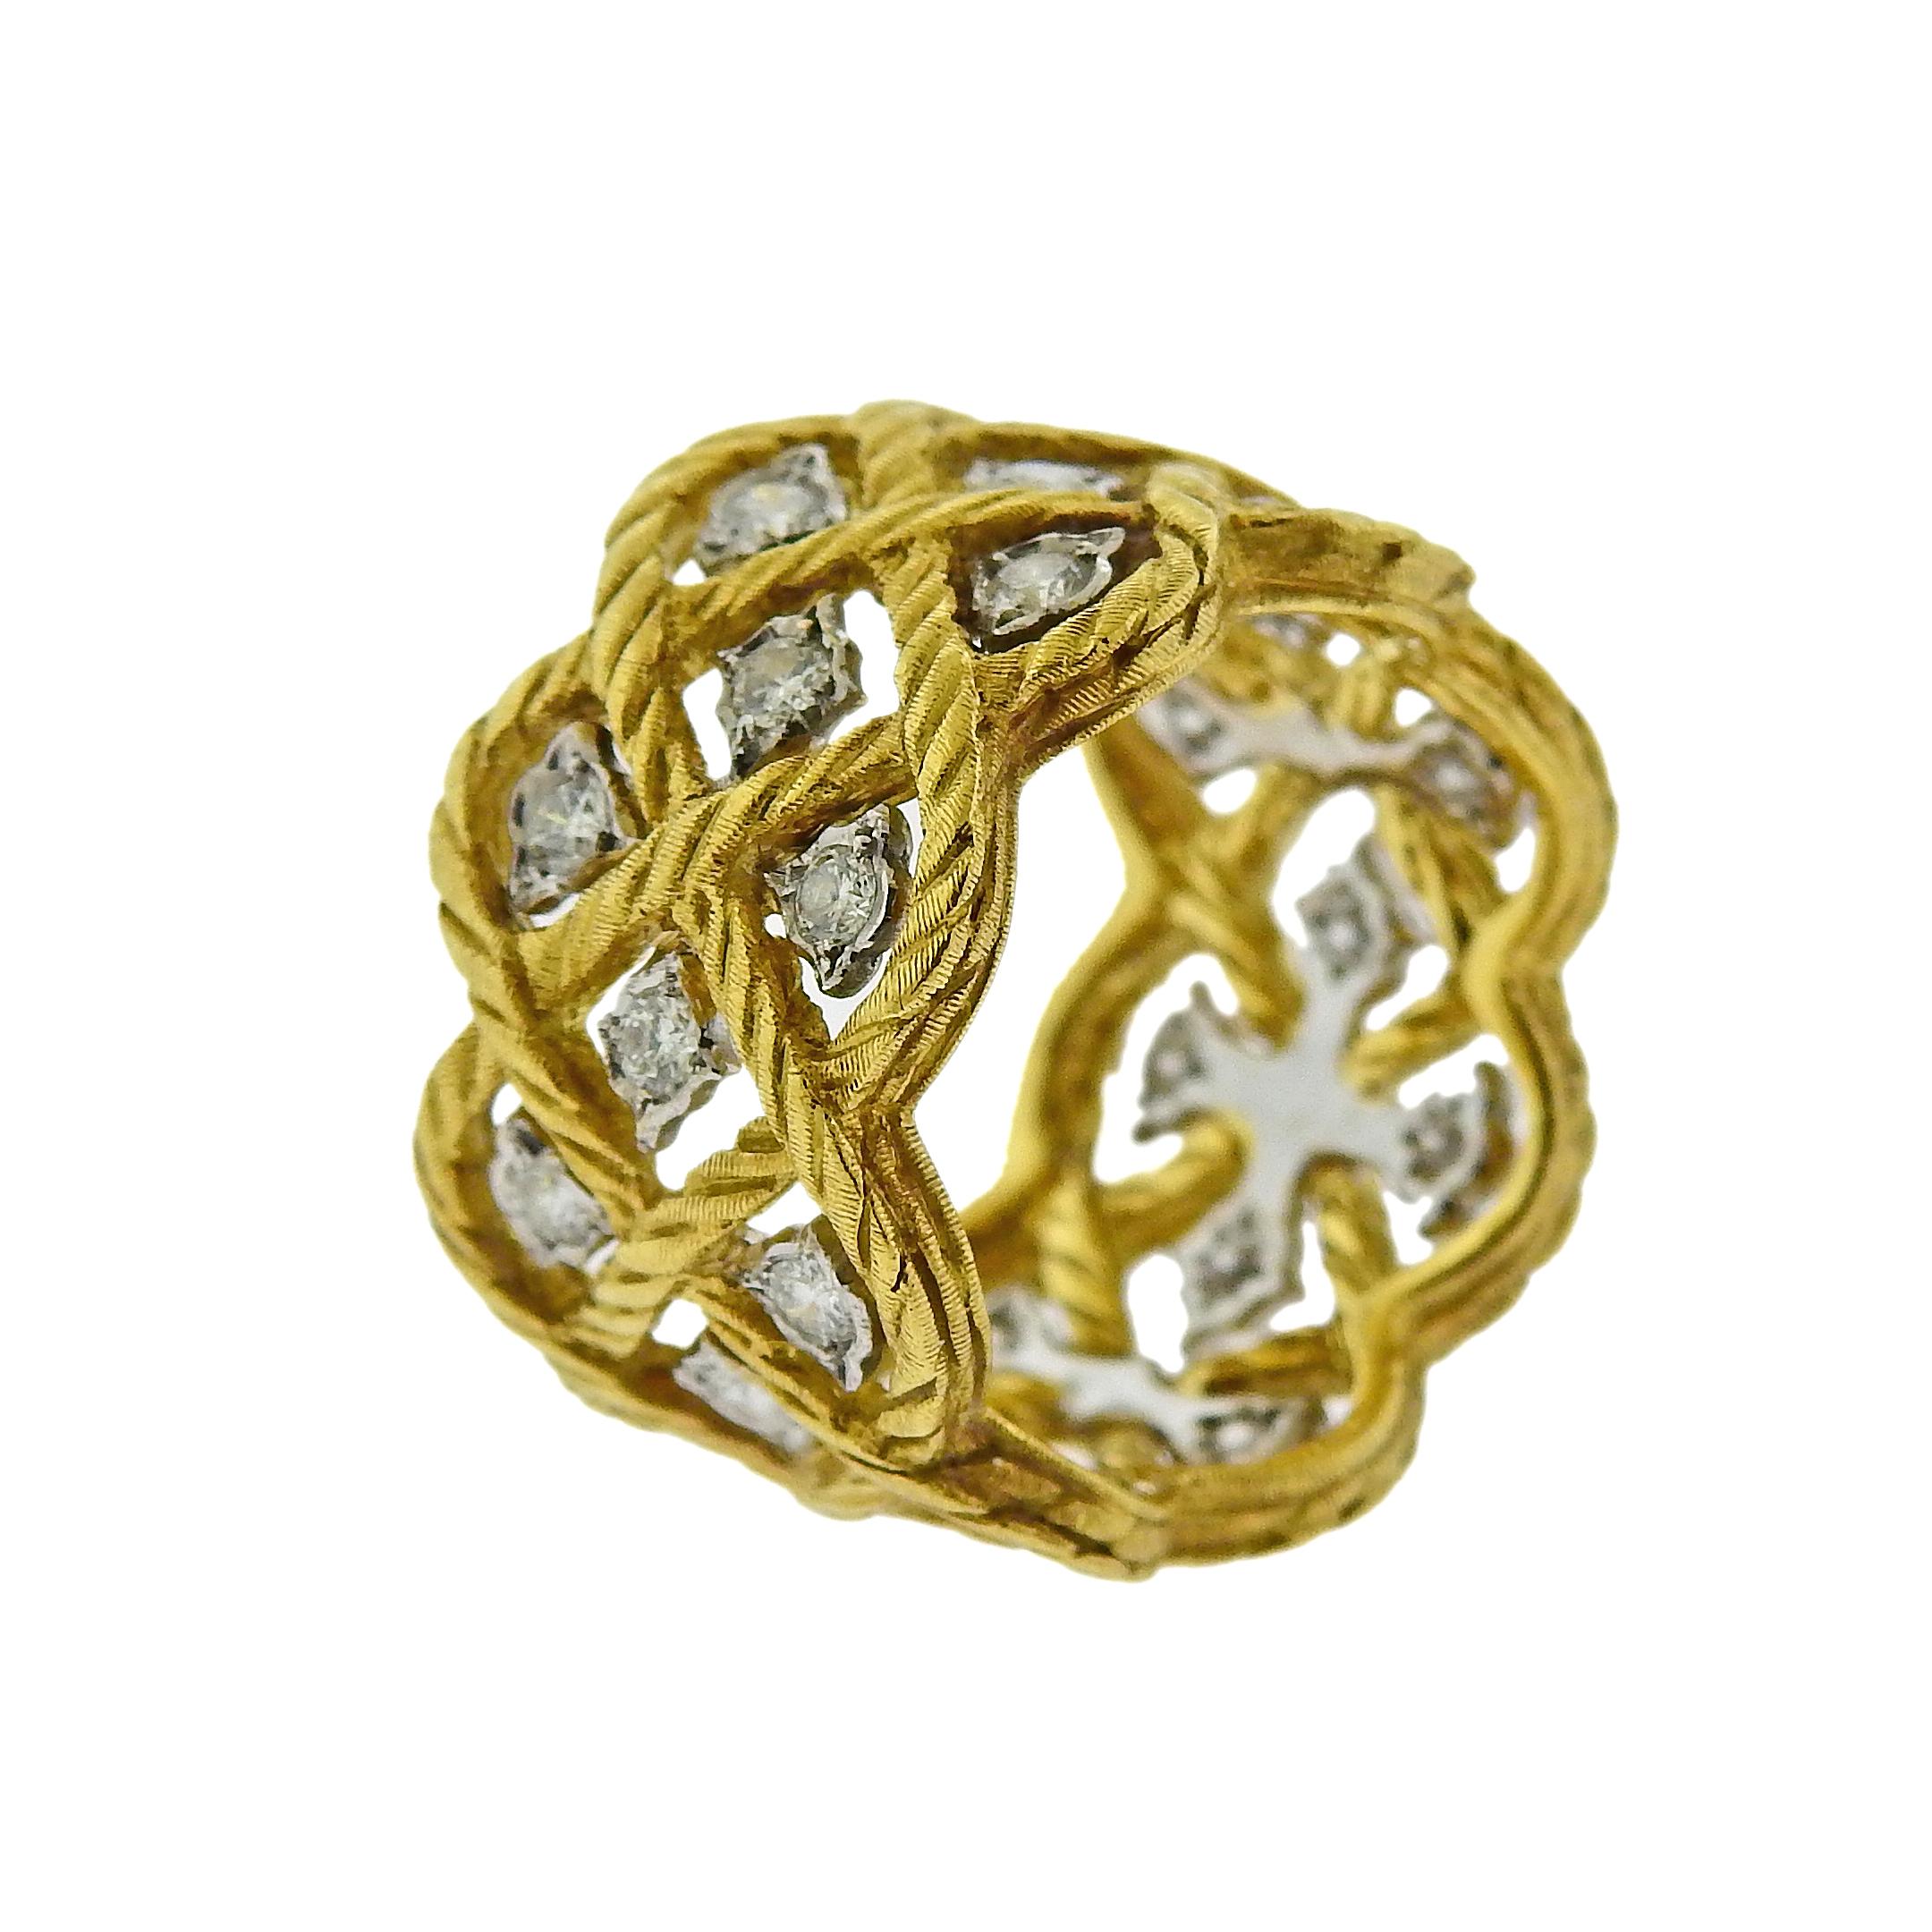 Beautiful 18k yellow gold Etoilee wide band ring, crafted by Buccellati, adorned with approx. 0.72ctw in H/VS-SI diamonds.  Ring size - 5.5, ring is 14mm wide.  Weighs 9 grams. Marked: Ring size - 5.5, ring is 14mm wide.